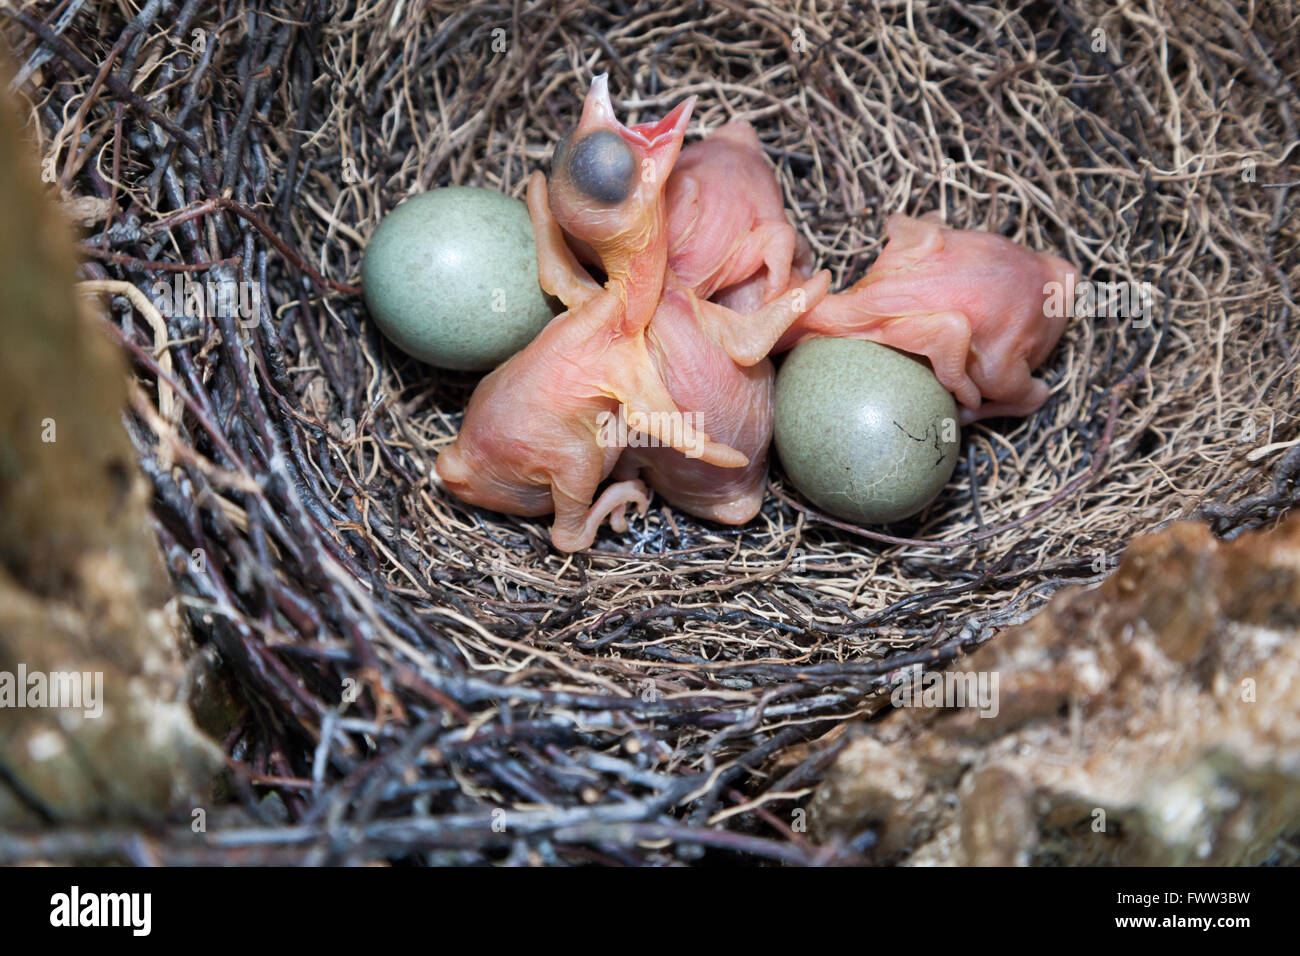 Garrulus glandarius. The nest of the Jay in nature. Moscow region, Russia Stock Photo